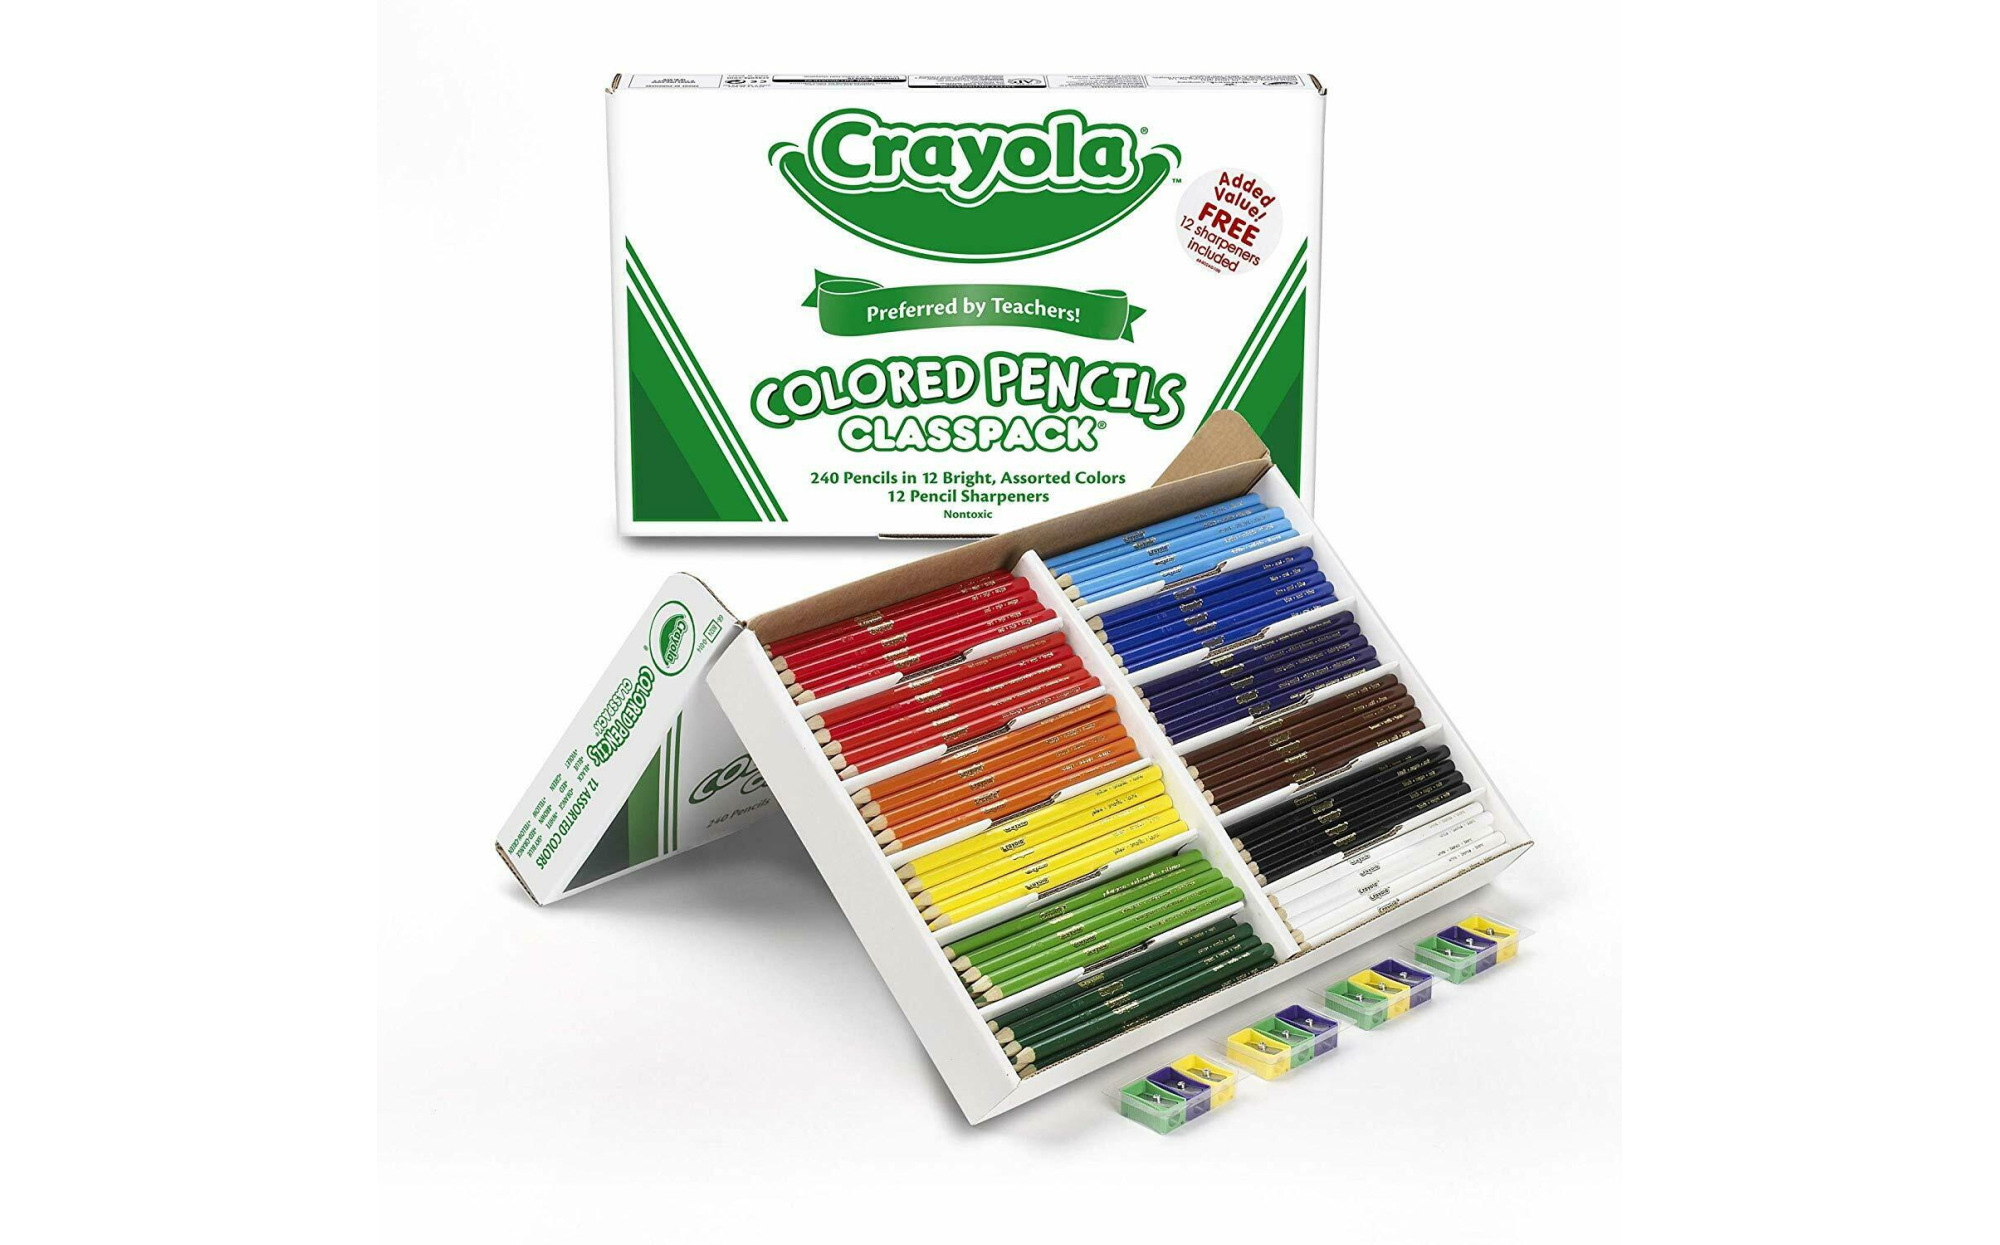 Colors of the World Broad Line Washable Markers Classpack - 240 ct